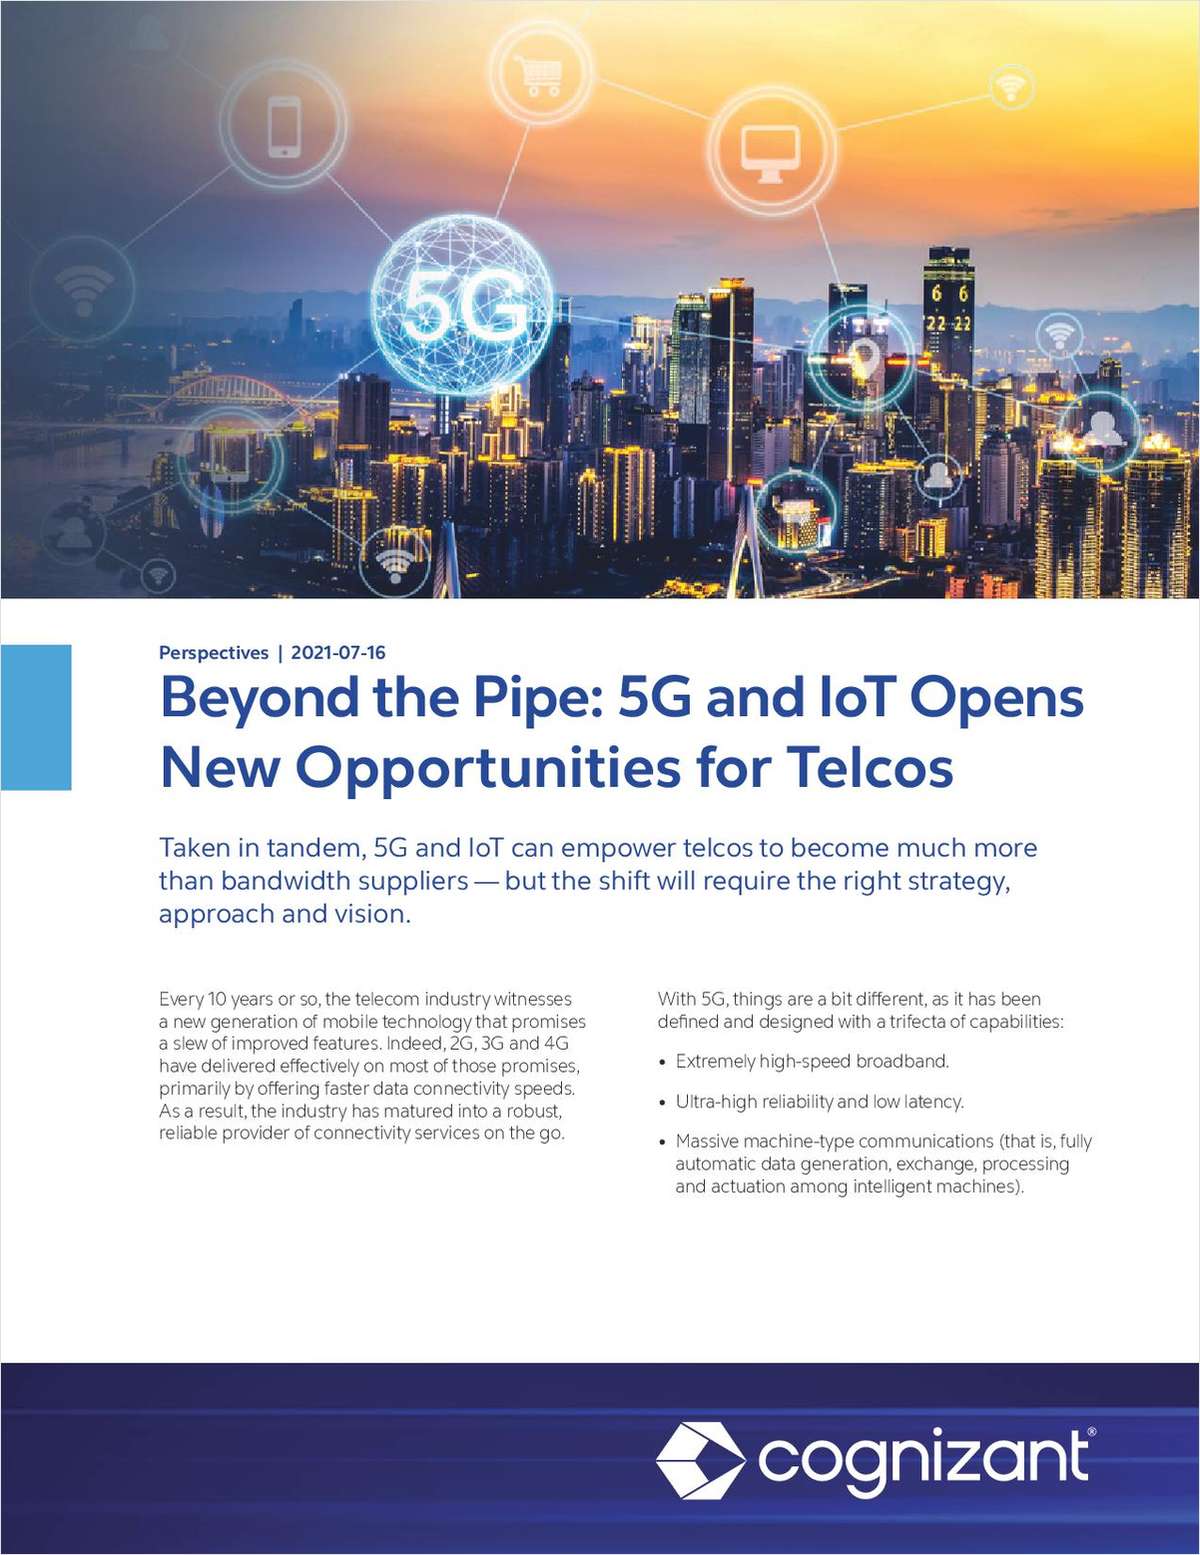 Beyond the Pipe: 5G and IoT Opens New Opportunities for Telcos